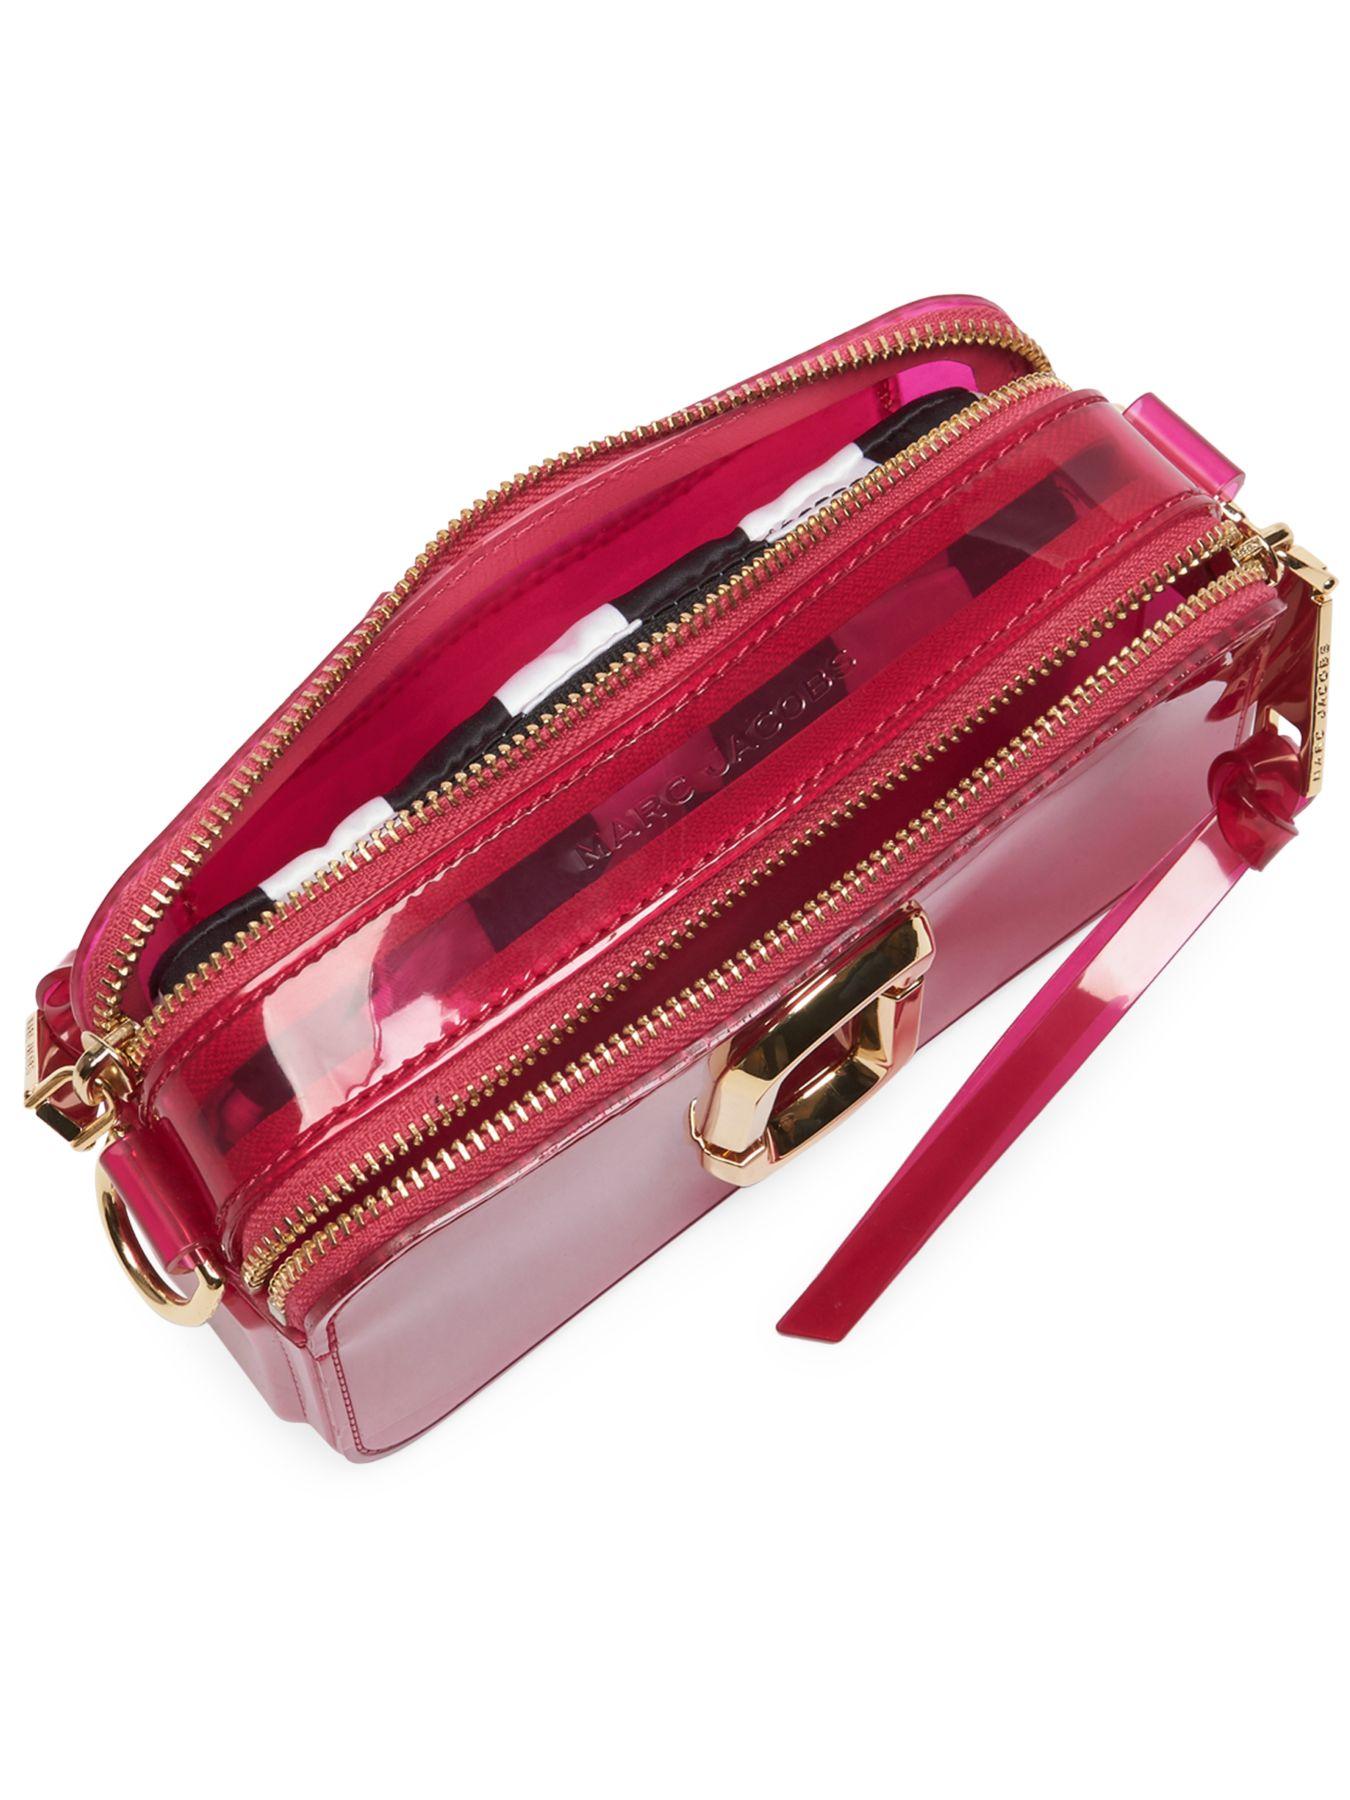 Marc Jacobs Women's The Jelly Glitter Snapshot Bag - Pink Multi